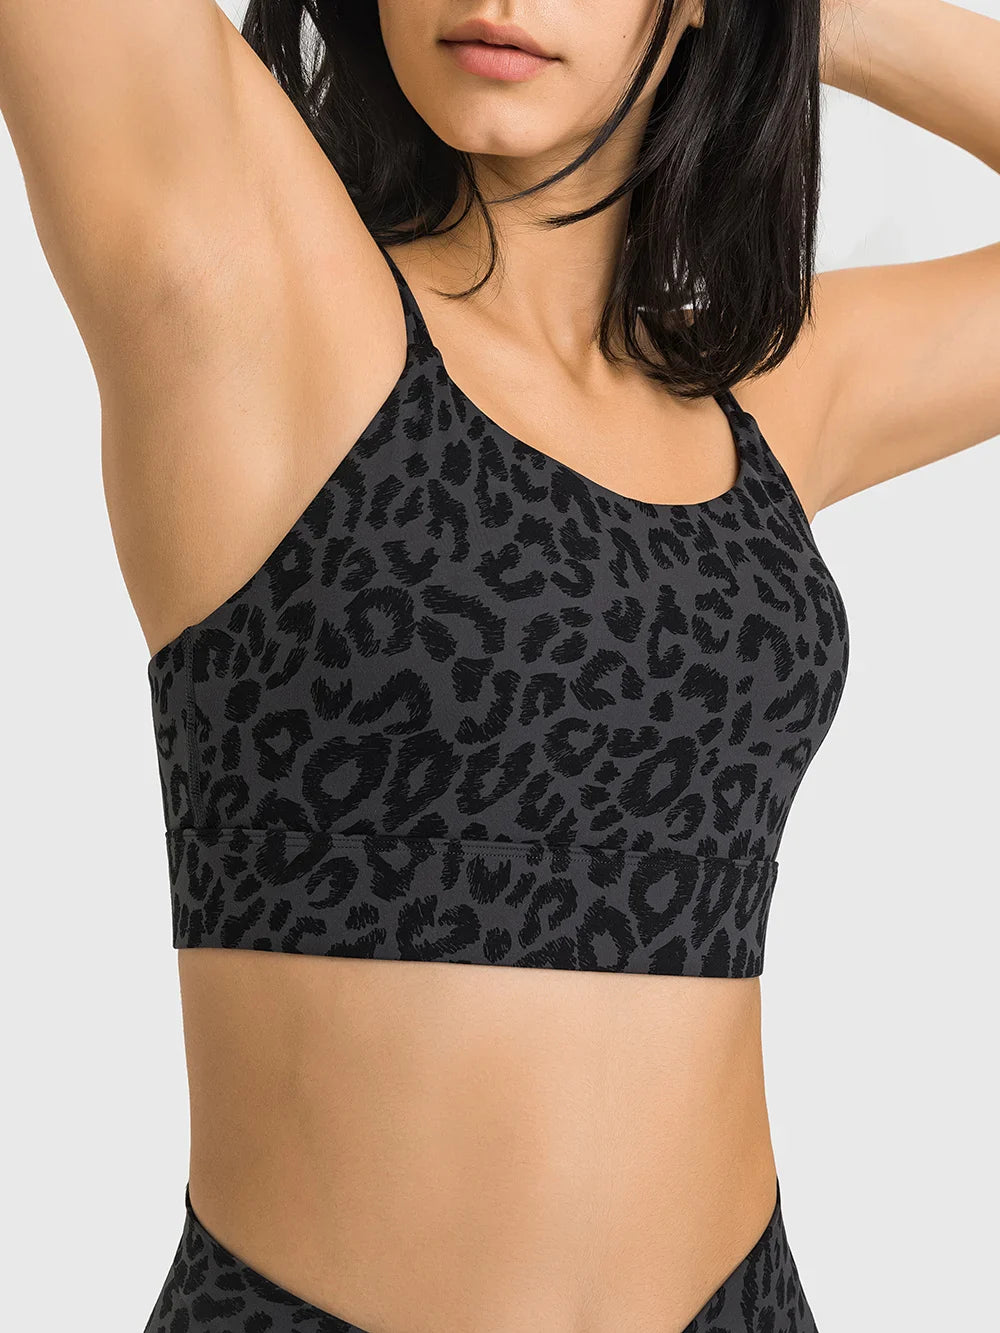 Canmol Leopard Double Strappy Back Sports Bra for Fitness Gym Running